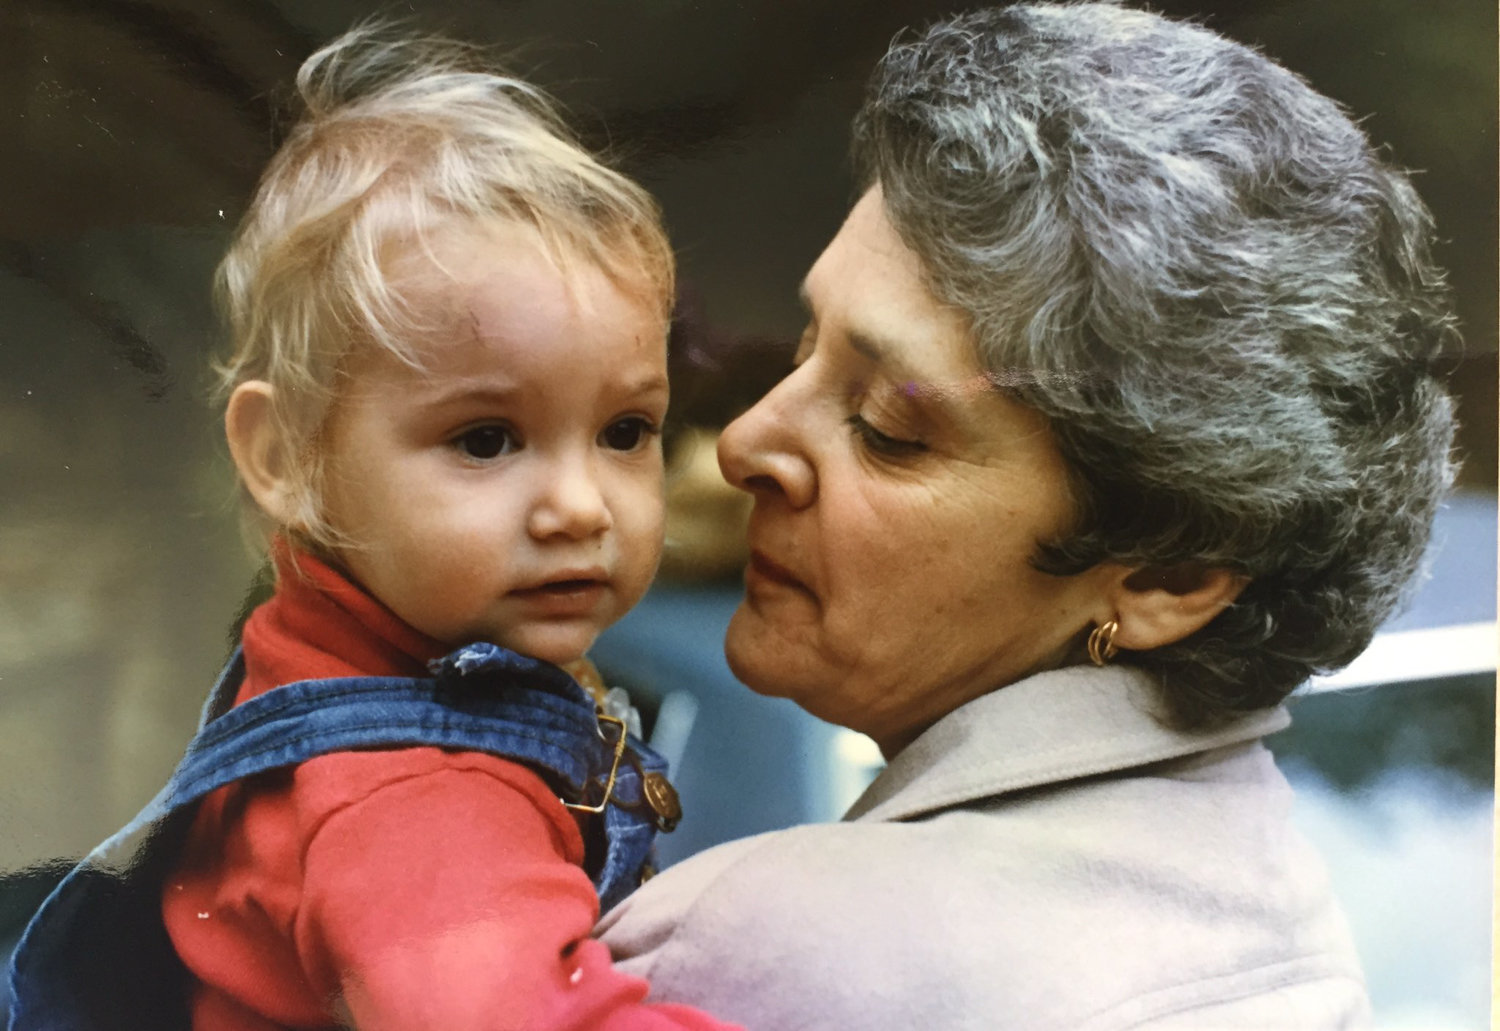 Muriel ‘Mickey’ Axelbank holds her granddaughter Rachel in an undated family photo. She was widely mourned following her death from complications related to COVID-19.